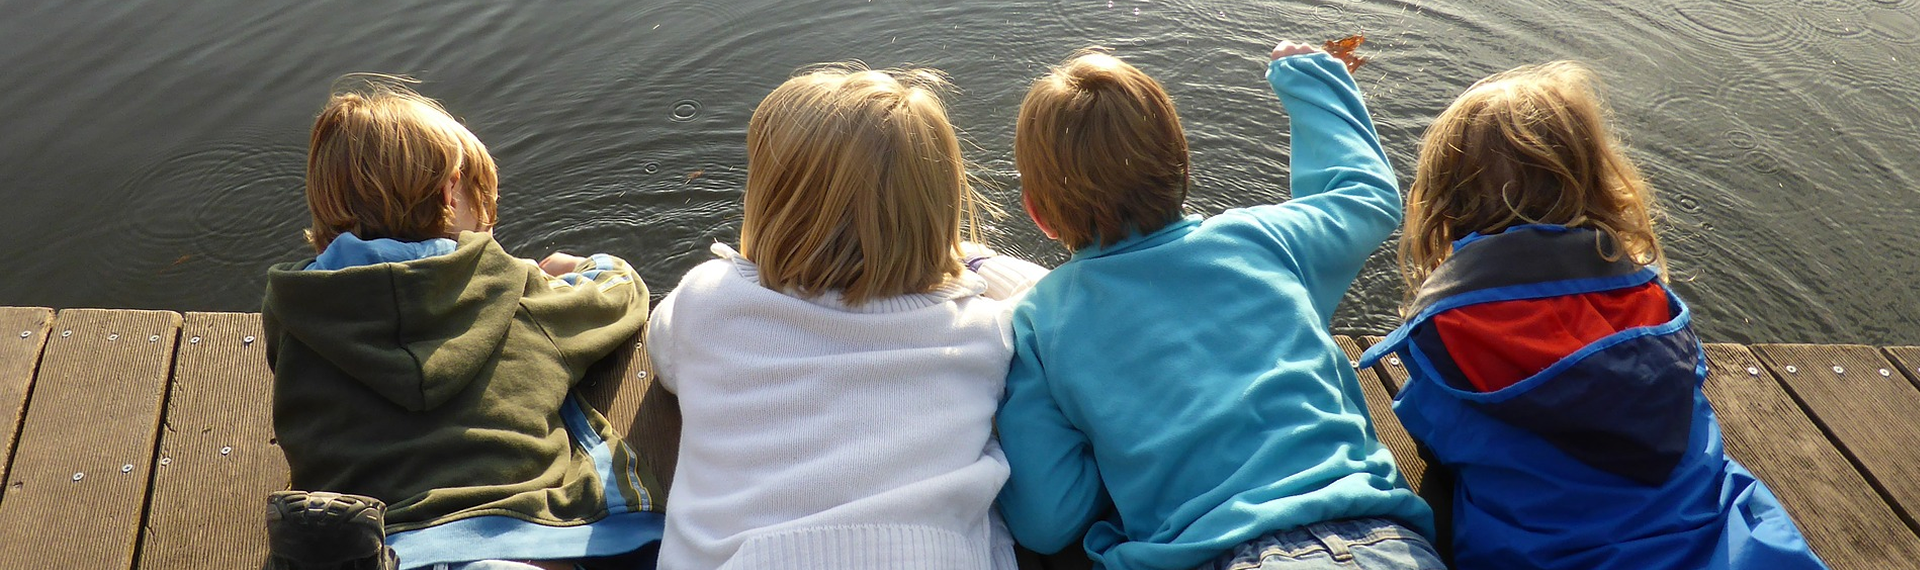 Children, Custody and Access | McMurray Family Law